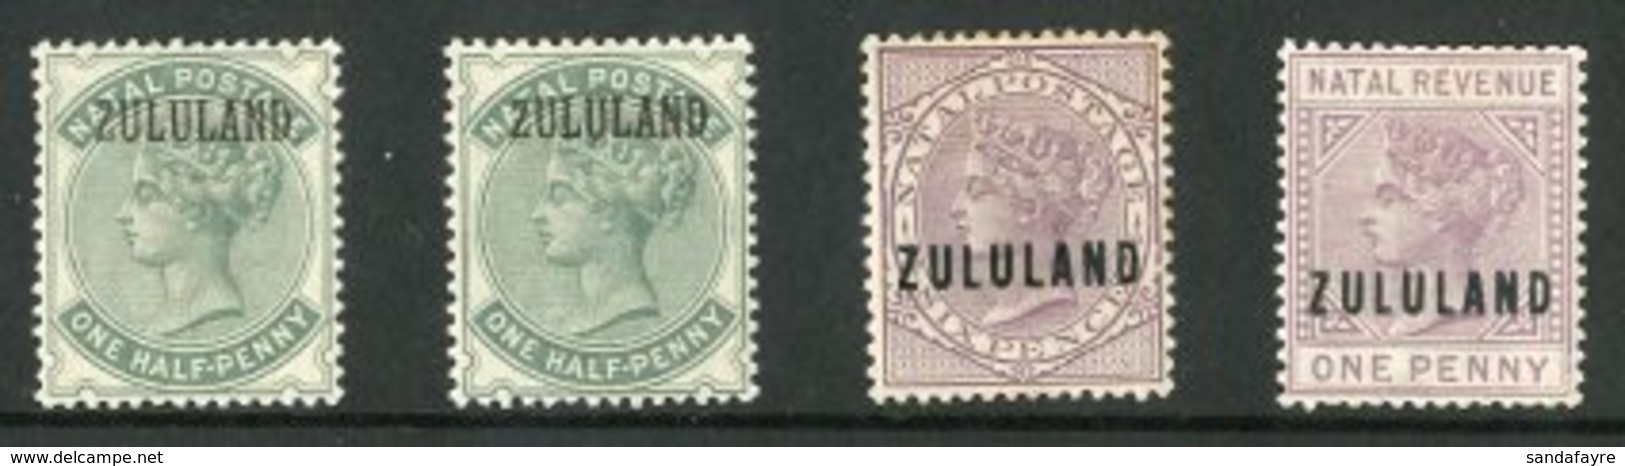 ZULULAND Overprints On Natal 1888 ½d Dull Green With And Without Stop, 1893 6d Dull Purple, And Postal Fiscal 1891 1d, F - Unclassified